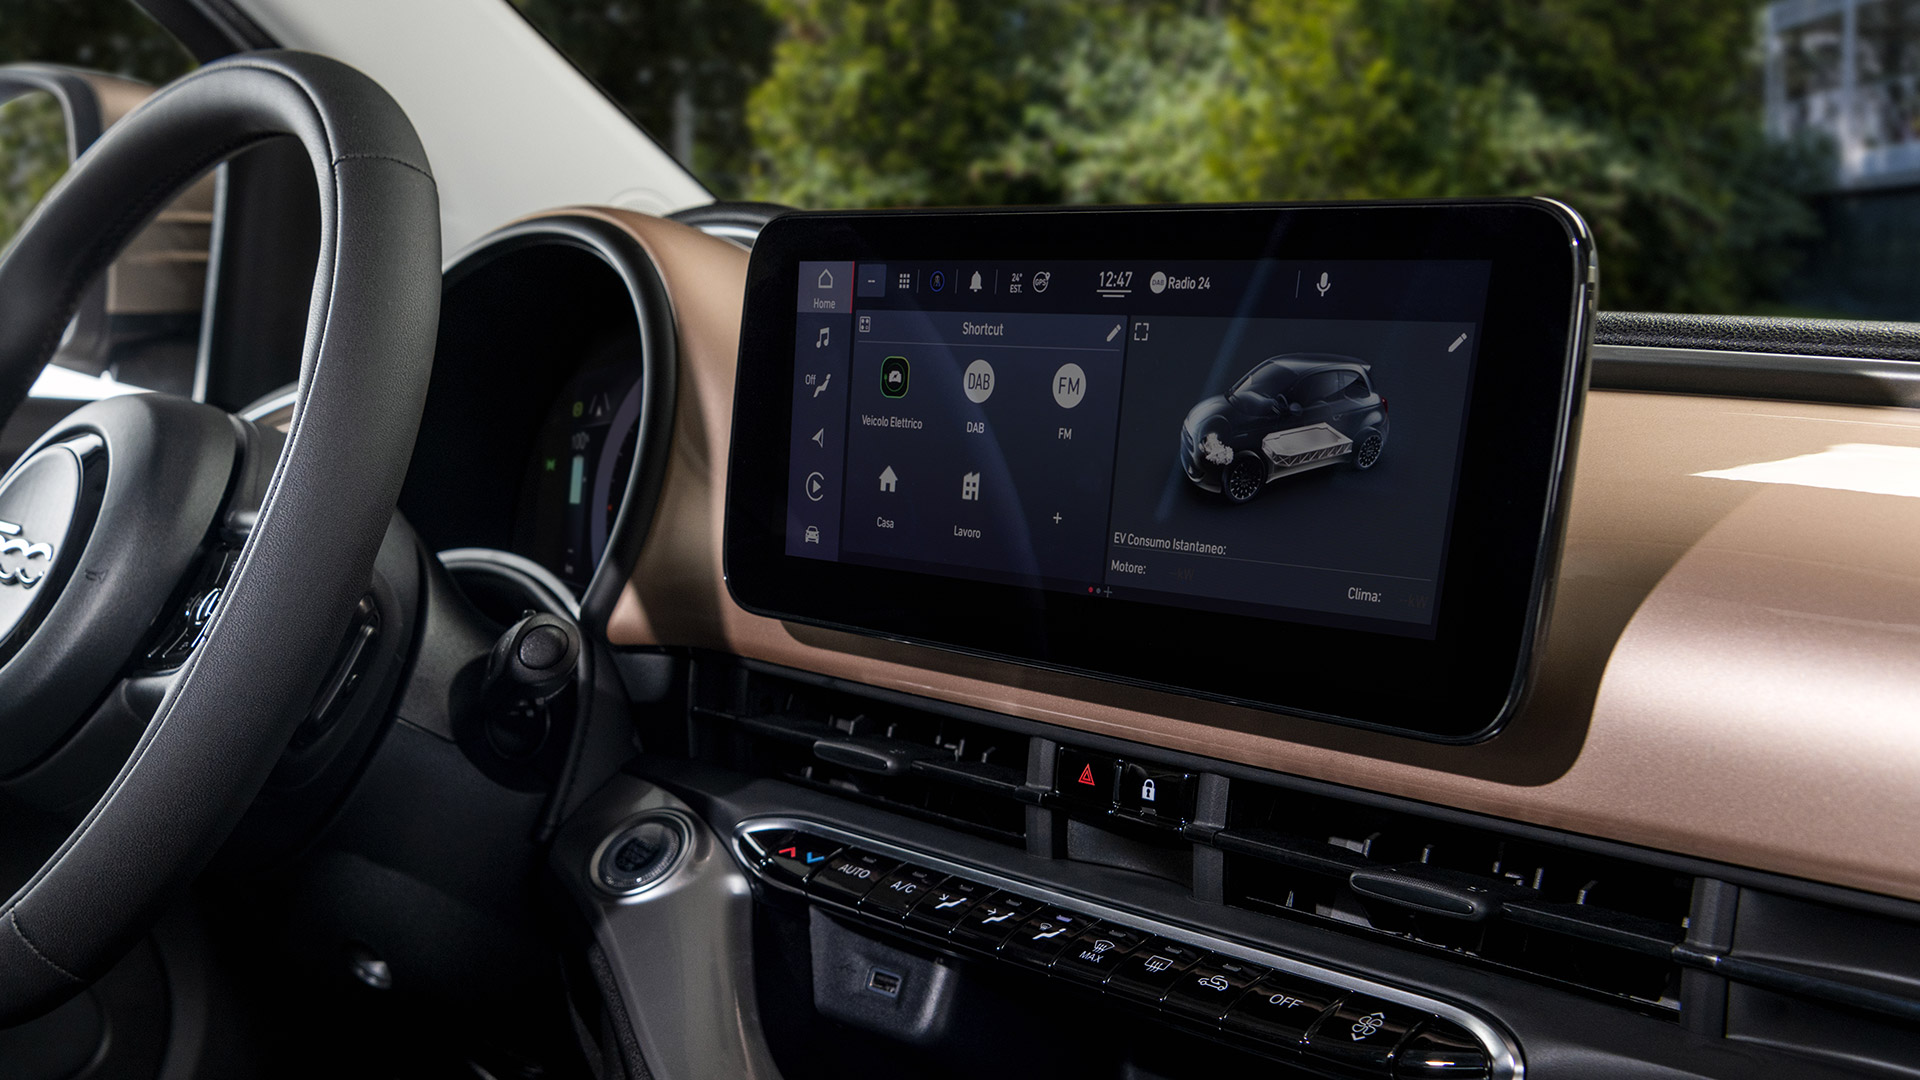 10.25” INFOTAINMENT SYSTEM WITH NAVIGATION 